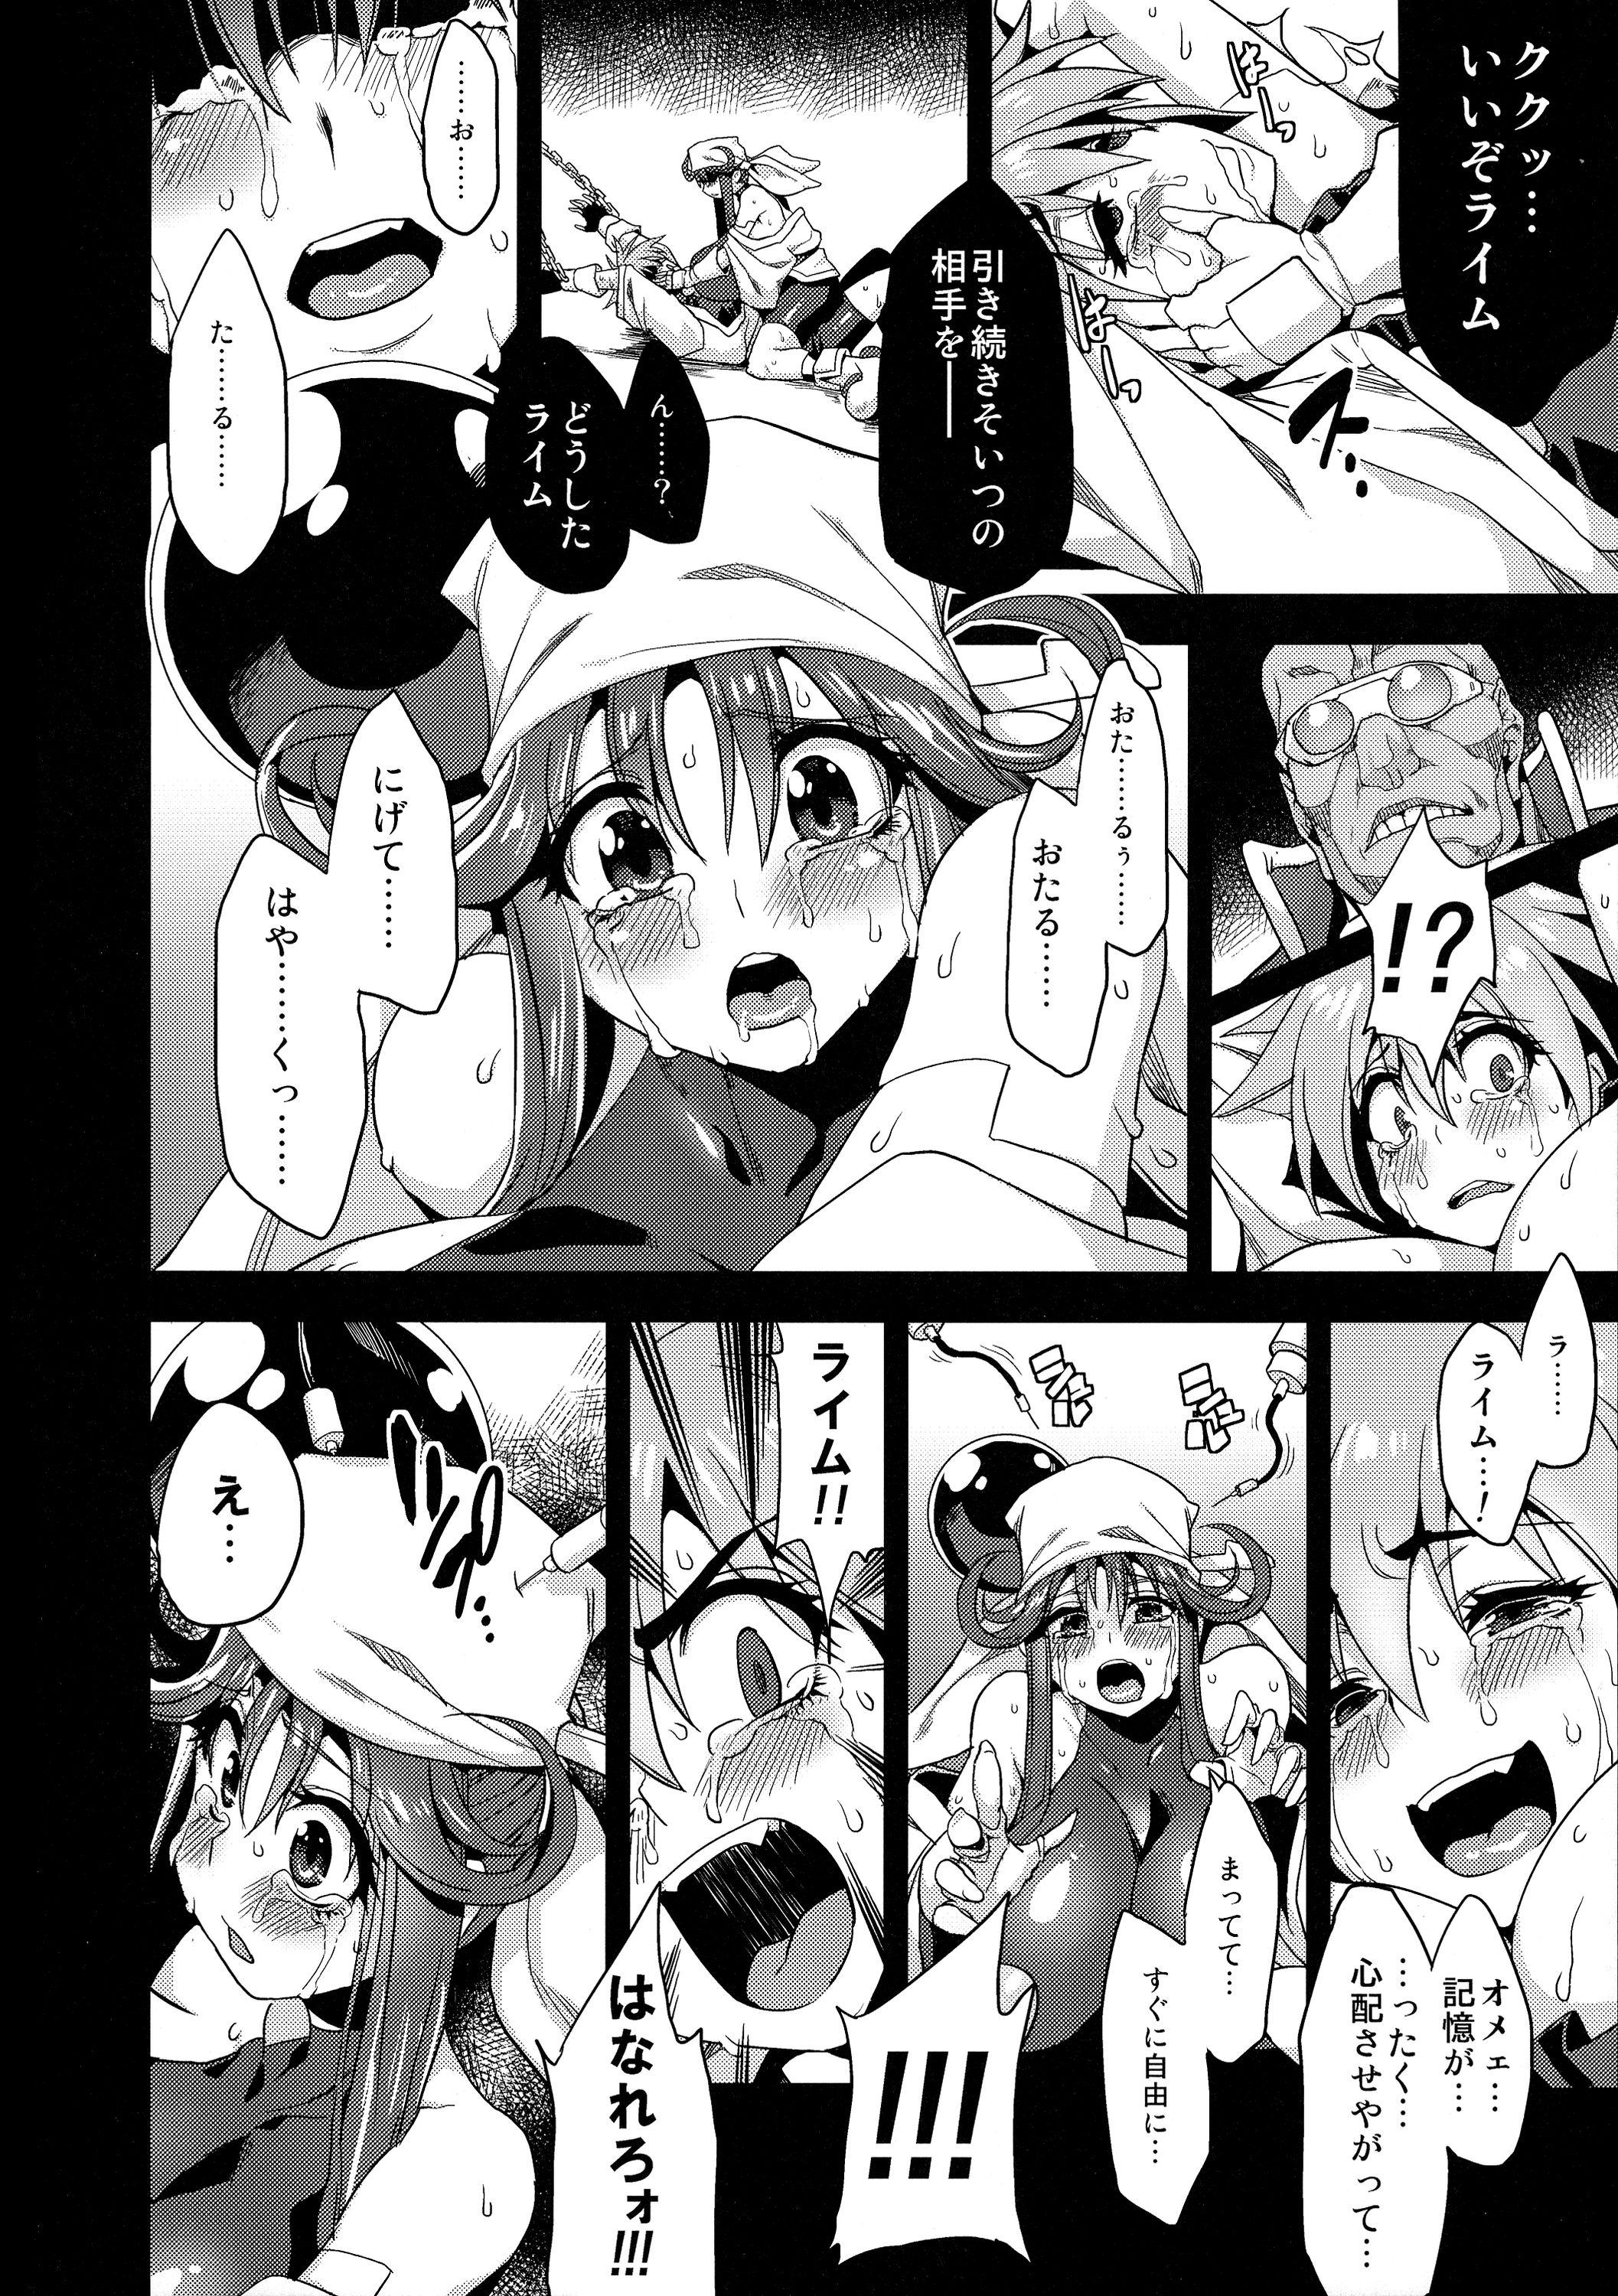 Best Blowjobs Ever Hentai Marionette 3 - Saber marionette Tall - Page 10